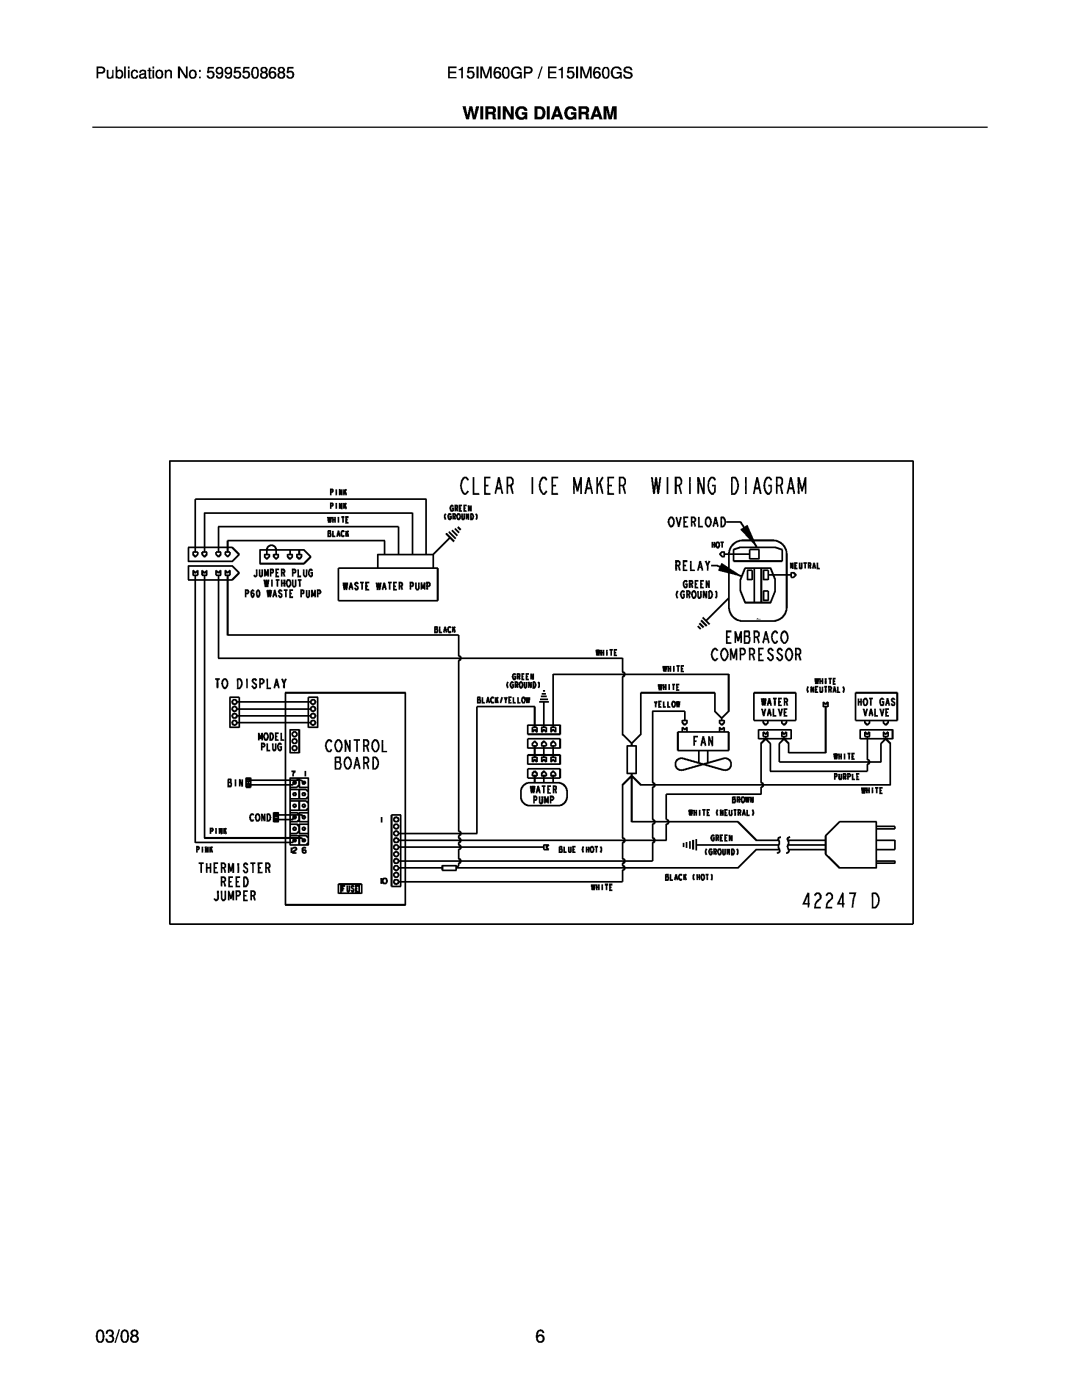 Electrolux E15IM60GSS0, E15IM60GPS0 manual Wiring Diagram, 03/08, Thermister Reed 